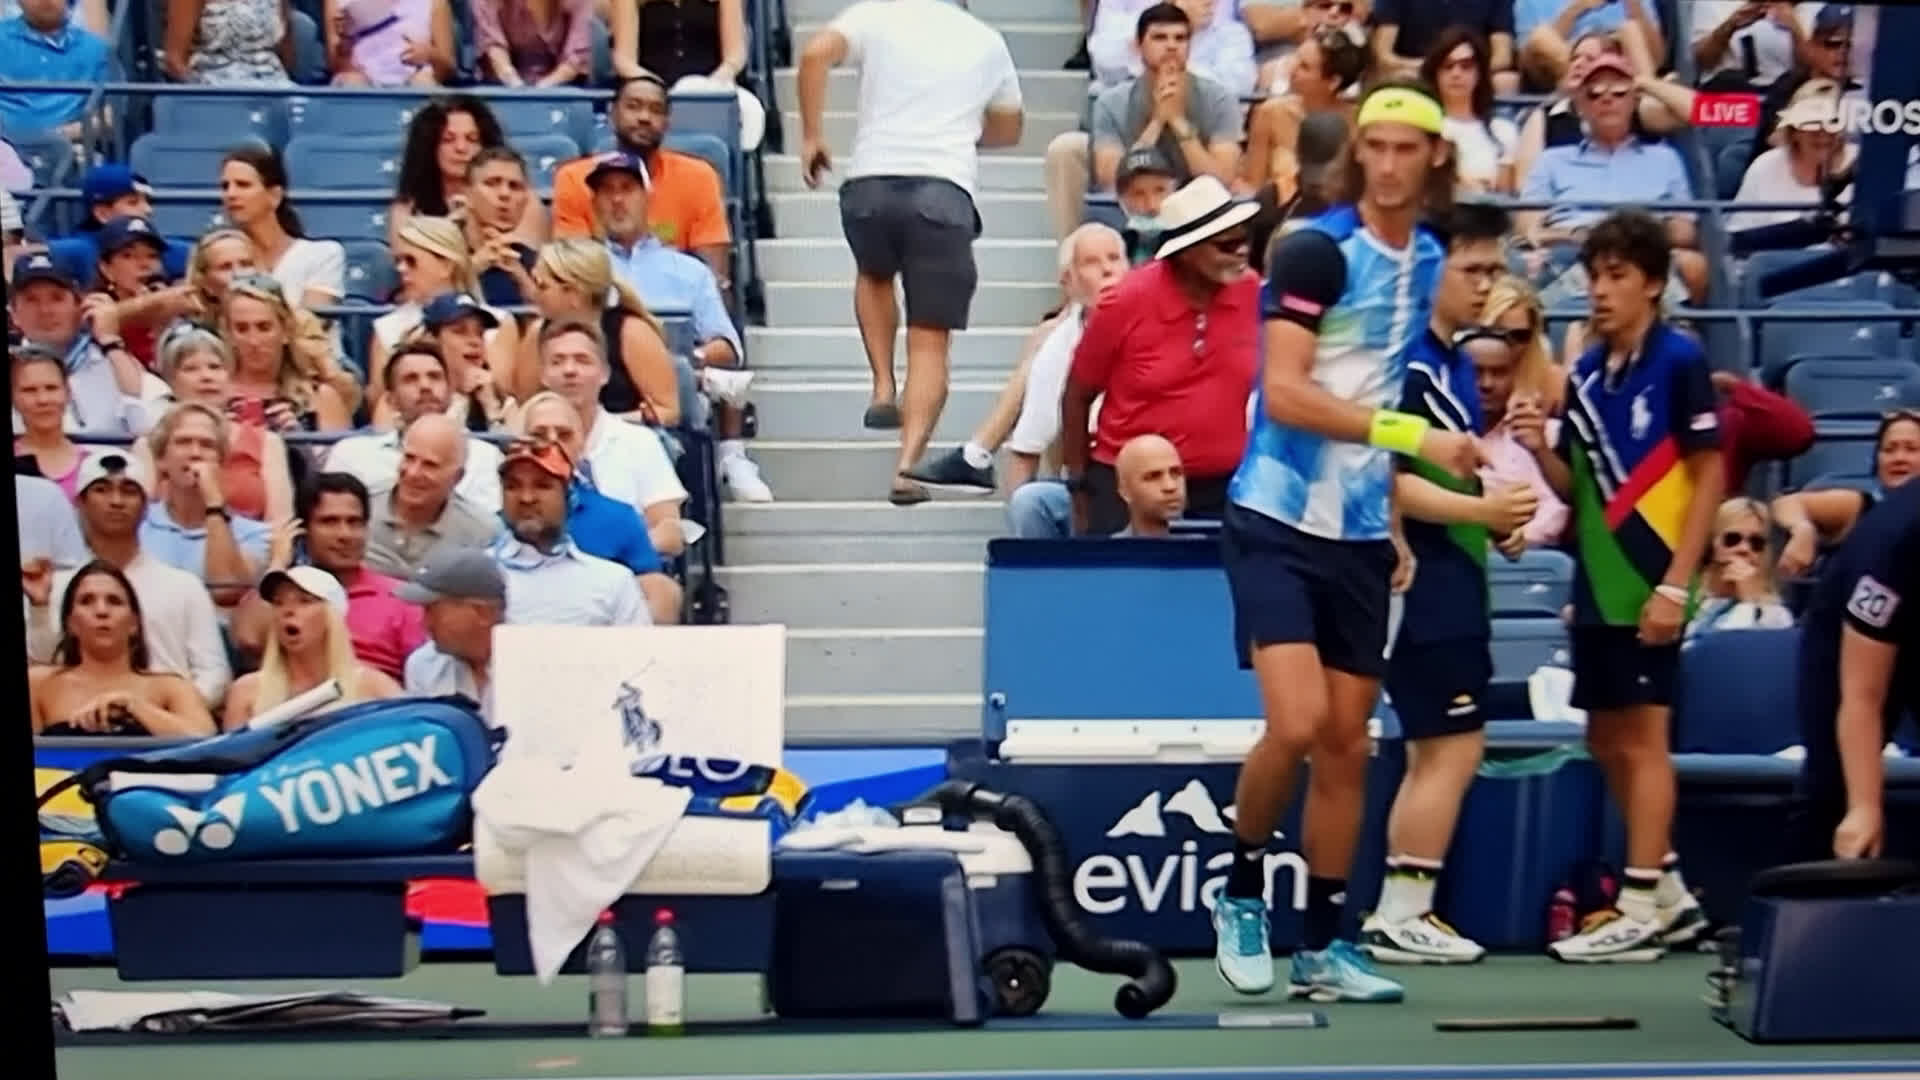 Hilarious scene Harris and Zverev and umpire cleaning the court after Harris bottle throw (please ignore the German commentary) r/tennis